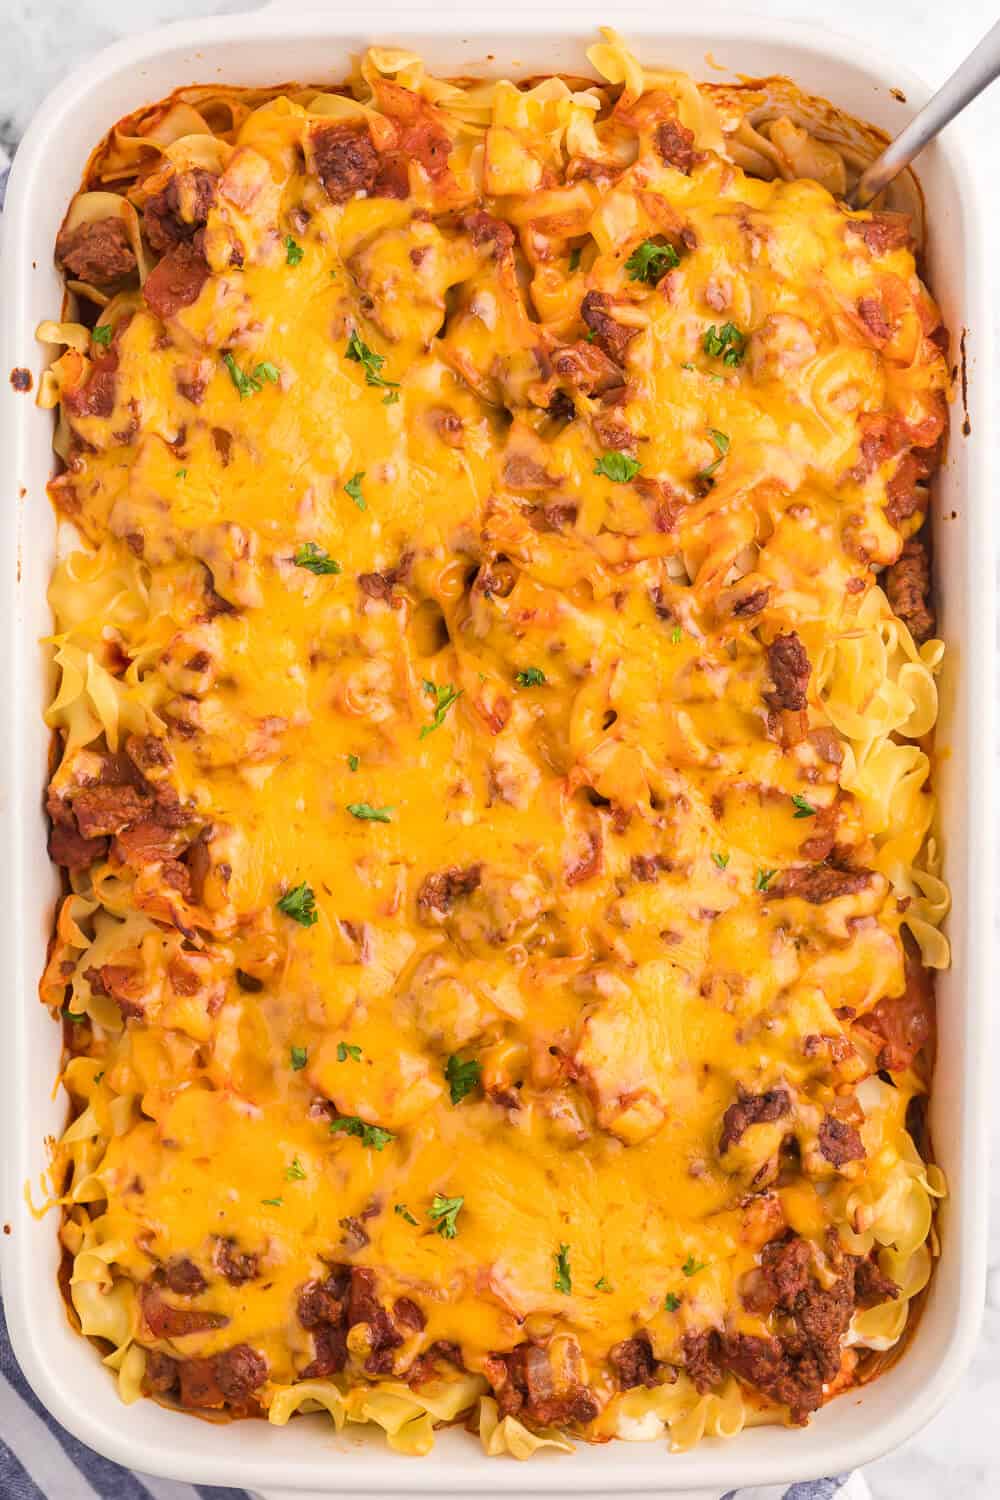 Cheesy Hamburger Supper - This casserole might remind you of a lasagna. It has the same cheesy tomato flavours, but the addition of cream cheese makes it even better!